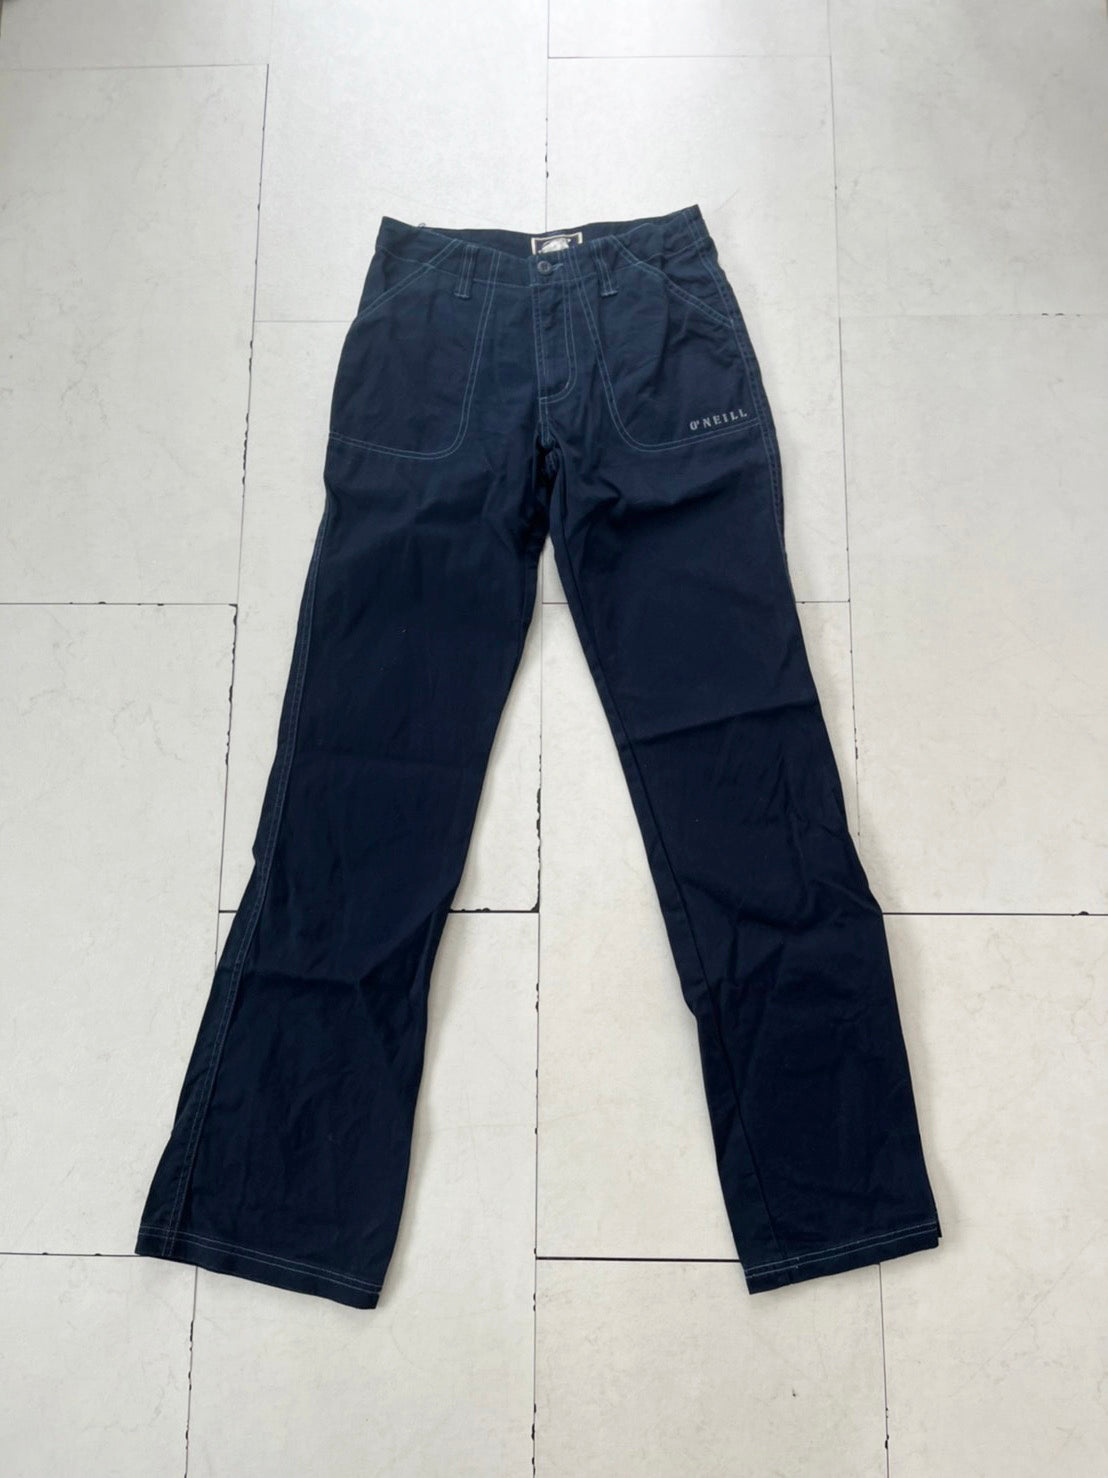 【O'neill】 00's O'neill Y2K surf cotton pants NAVY (size 3 ※women's L相当なのですが実際はMぐらいに感じます)